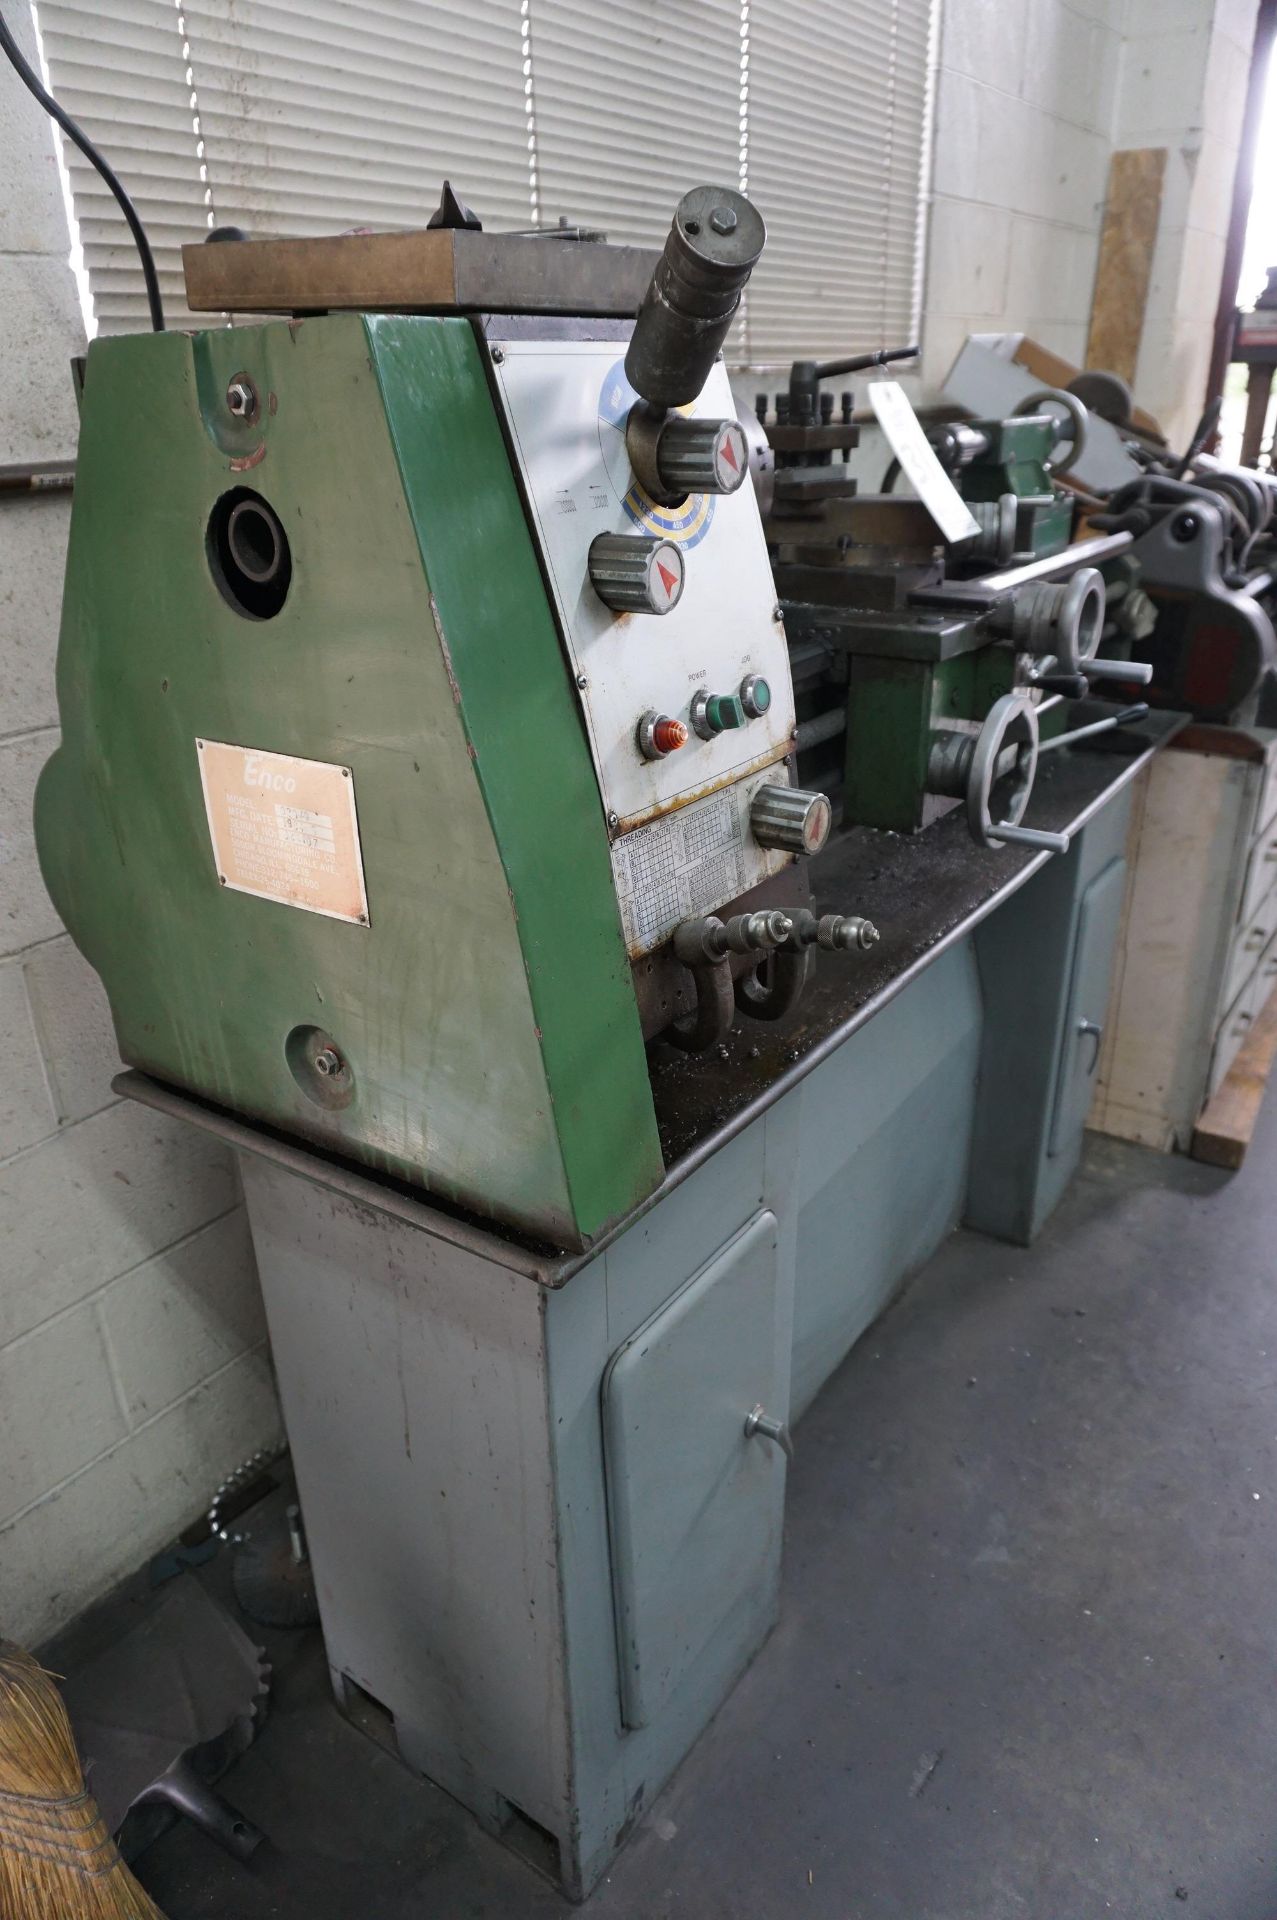 1984 ENCO MANUAL LATHE MODEL 02070 S/N 844107, 6" CHUCK, TAILSTOCK WITH JACOBS CHUCK - Image 3 of 9